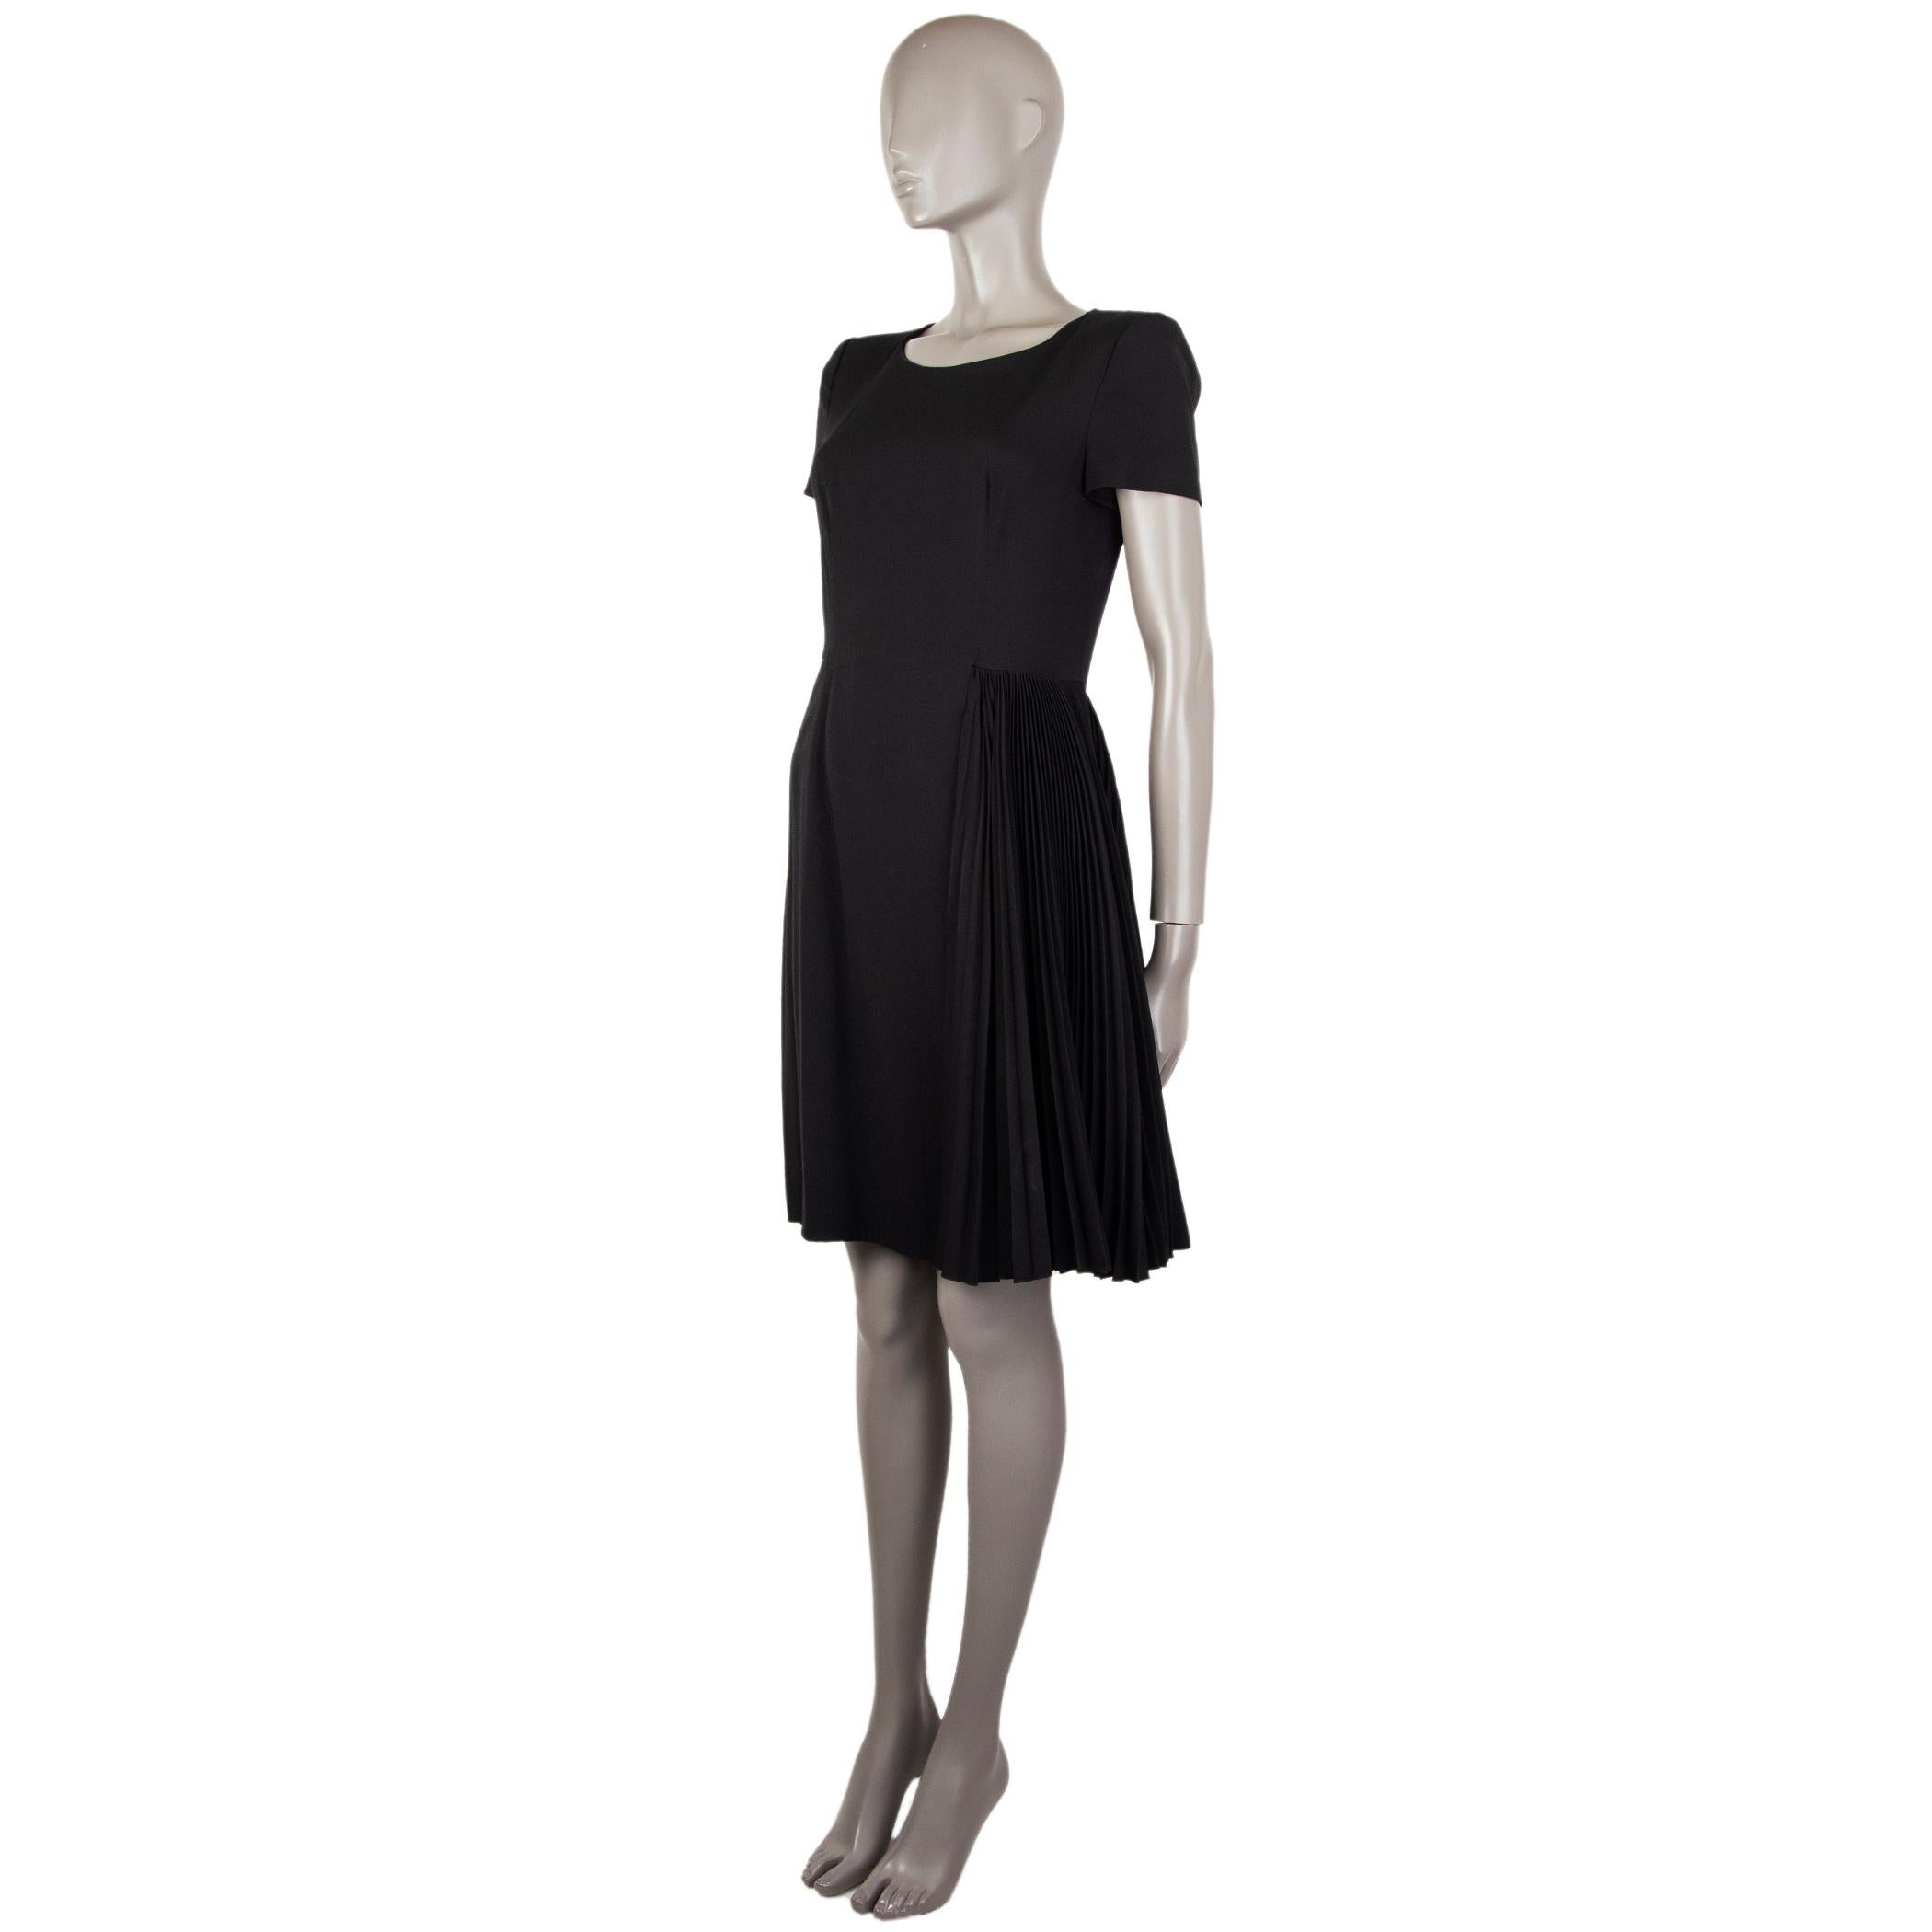 Prada short-sleeve dress in black polyester (57%) and viscose (43%). With padded shoulders and layered skirt with side plisse. Closes with hook and invisible zipper on the back. Lined in black cupro (60%) and silk (40%). Has been worn and is in